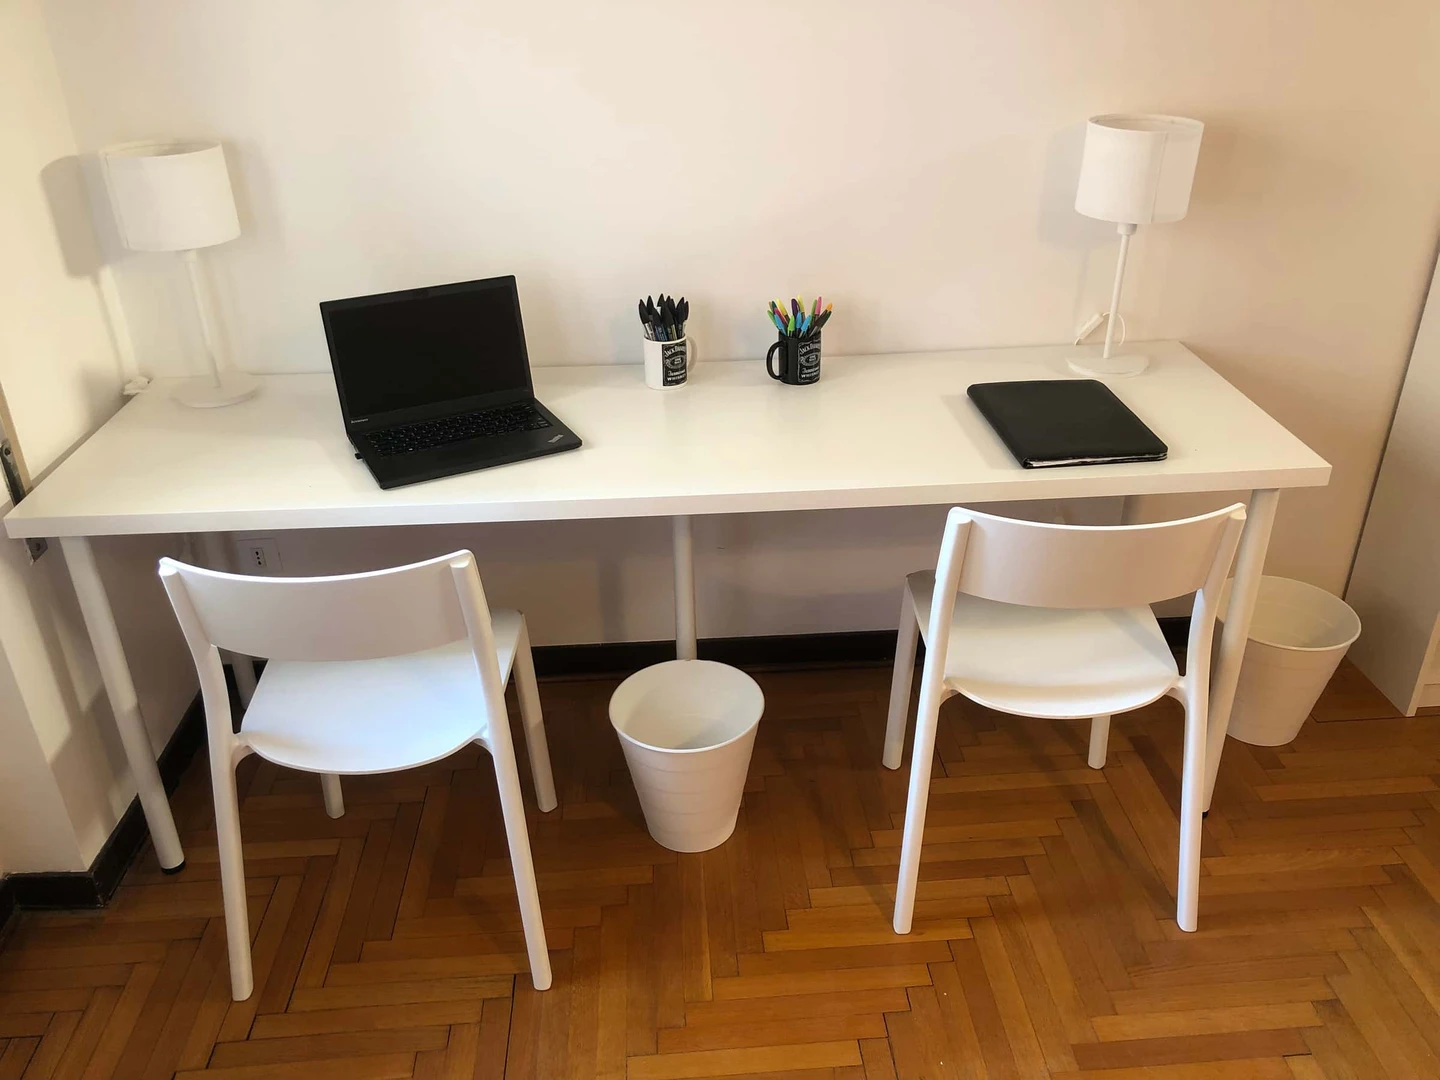 Bright shared room for rent in Padova